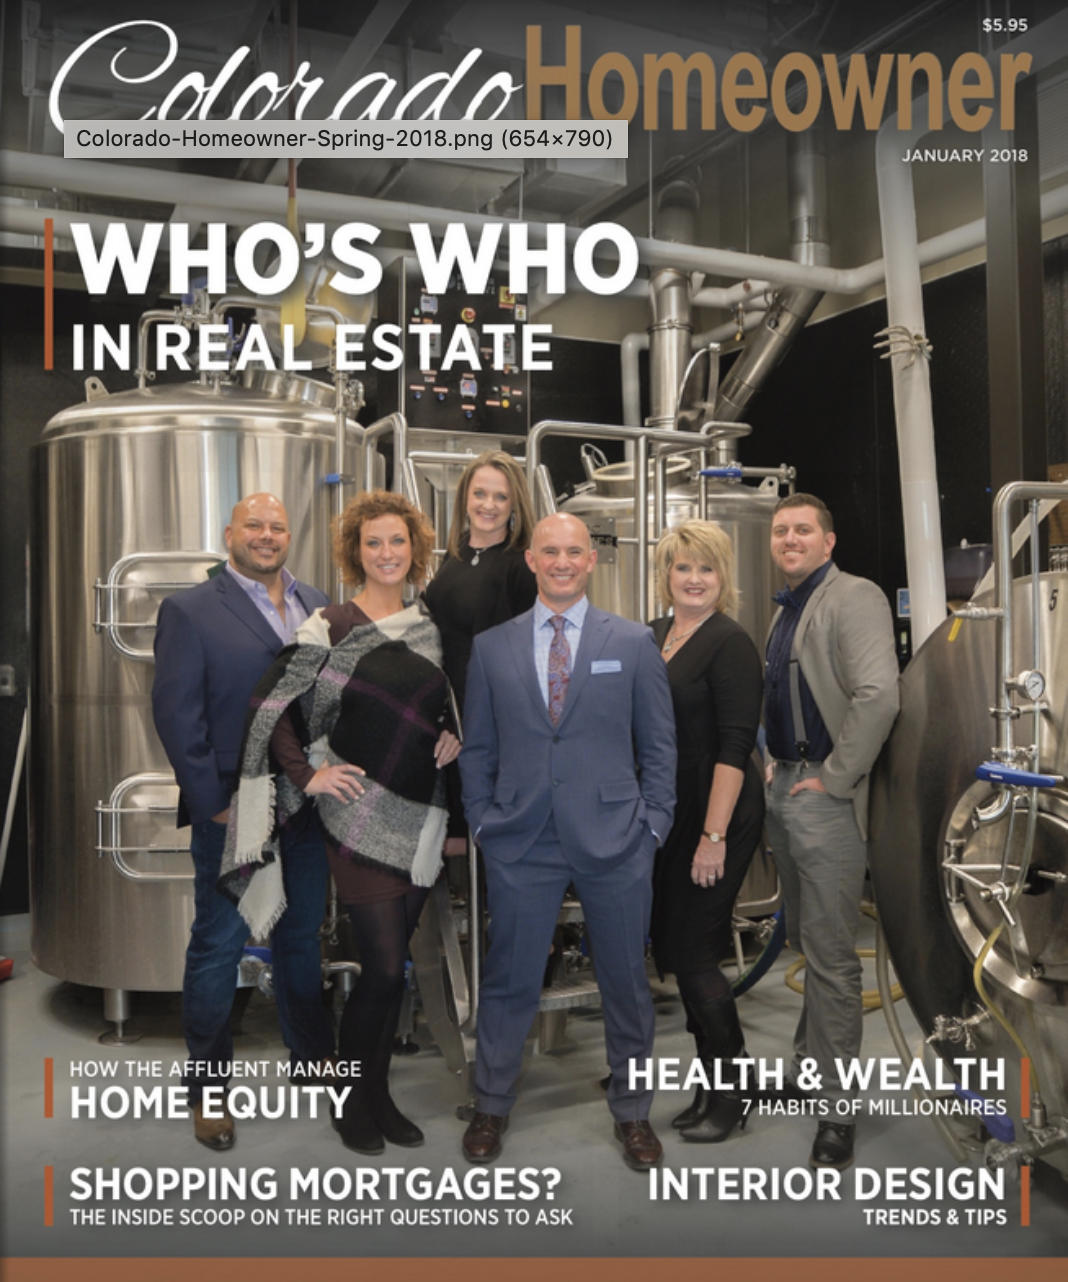 Colorado Homeowner Magazine: Who's Who in Real Estate